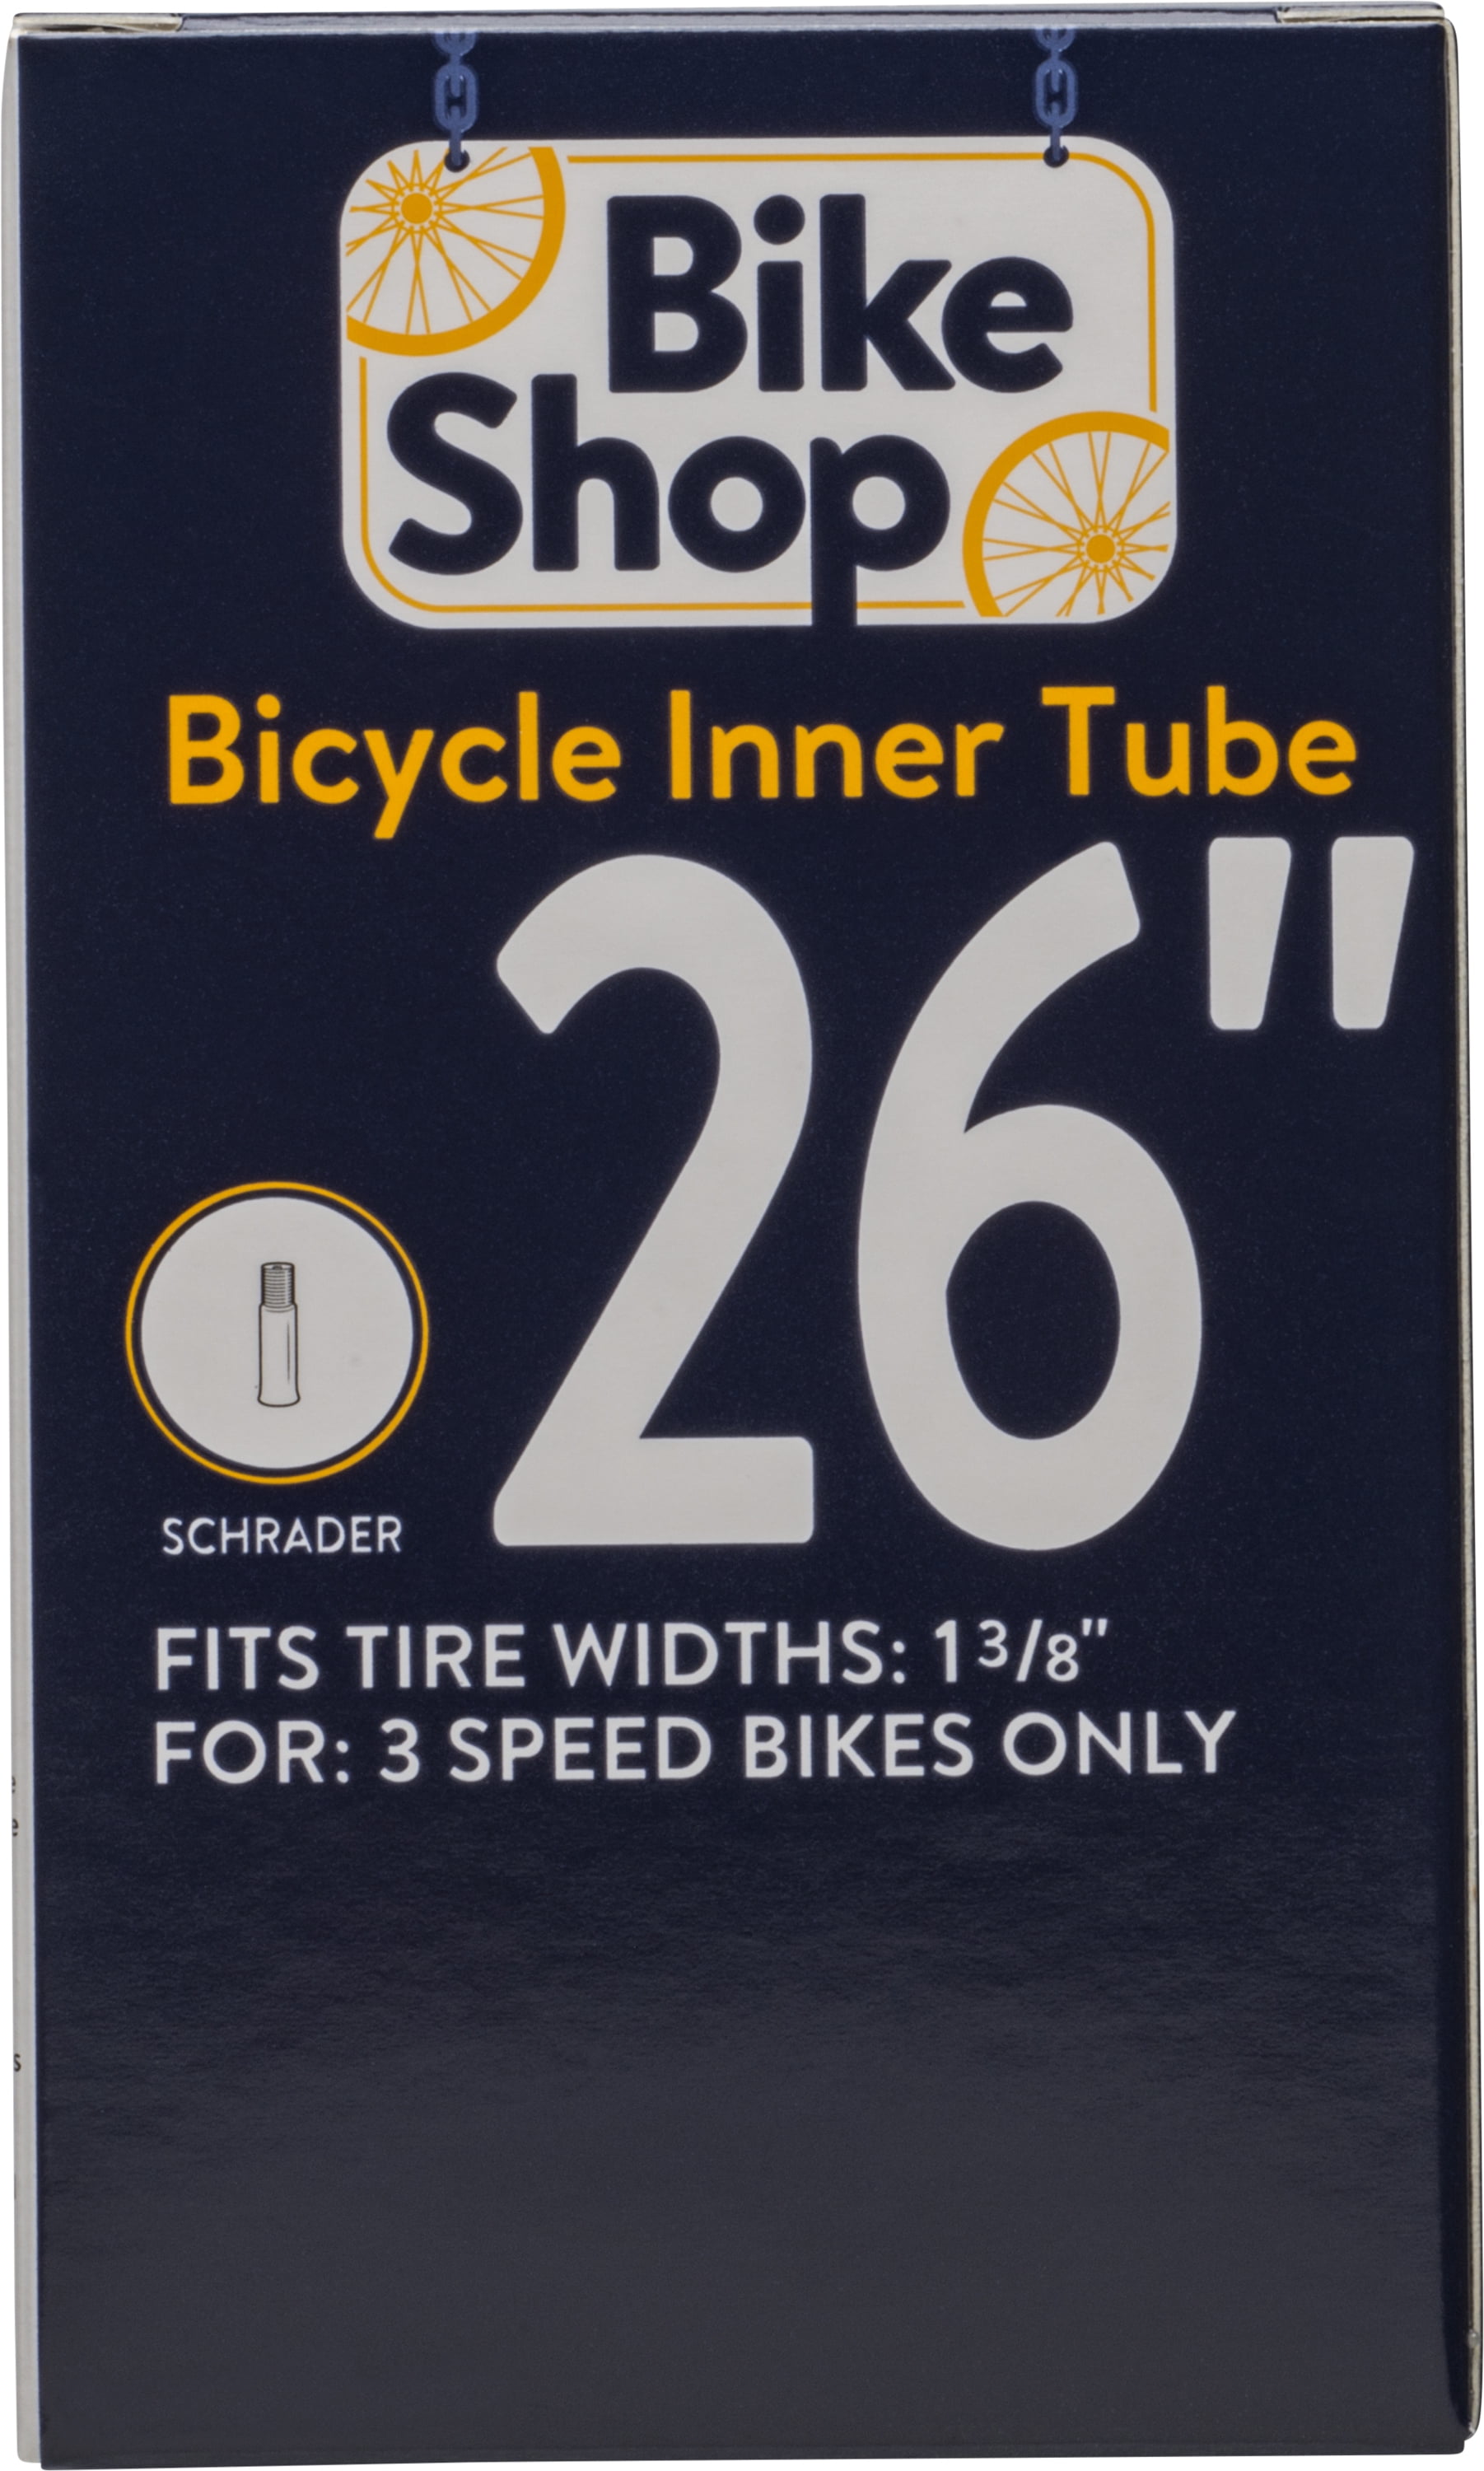 Details about   Job Lot 5 Black Inner Tubes Bike Bicycle Schrader 16 x 1.75-2.0 in Brand New 